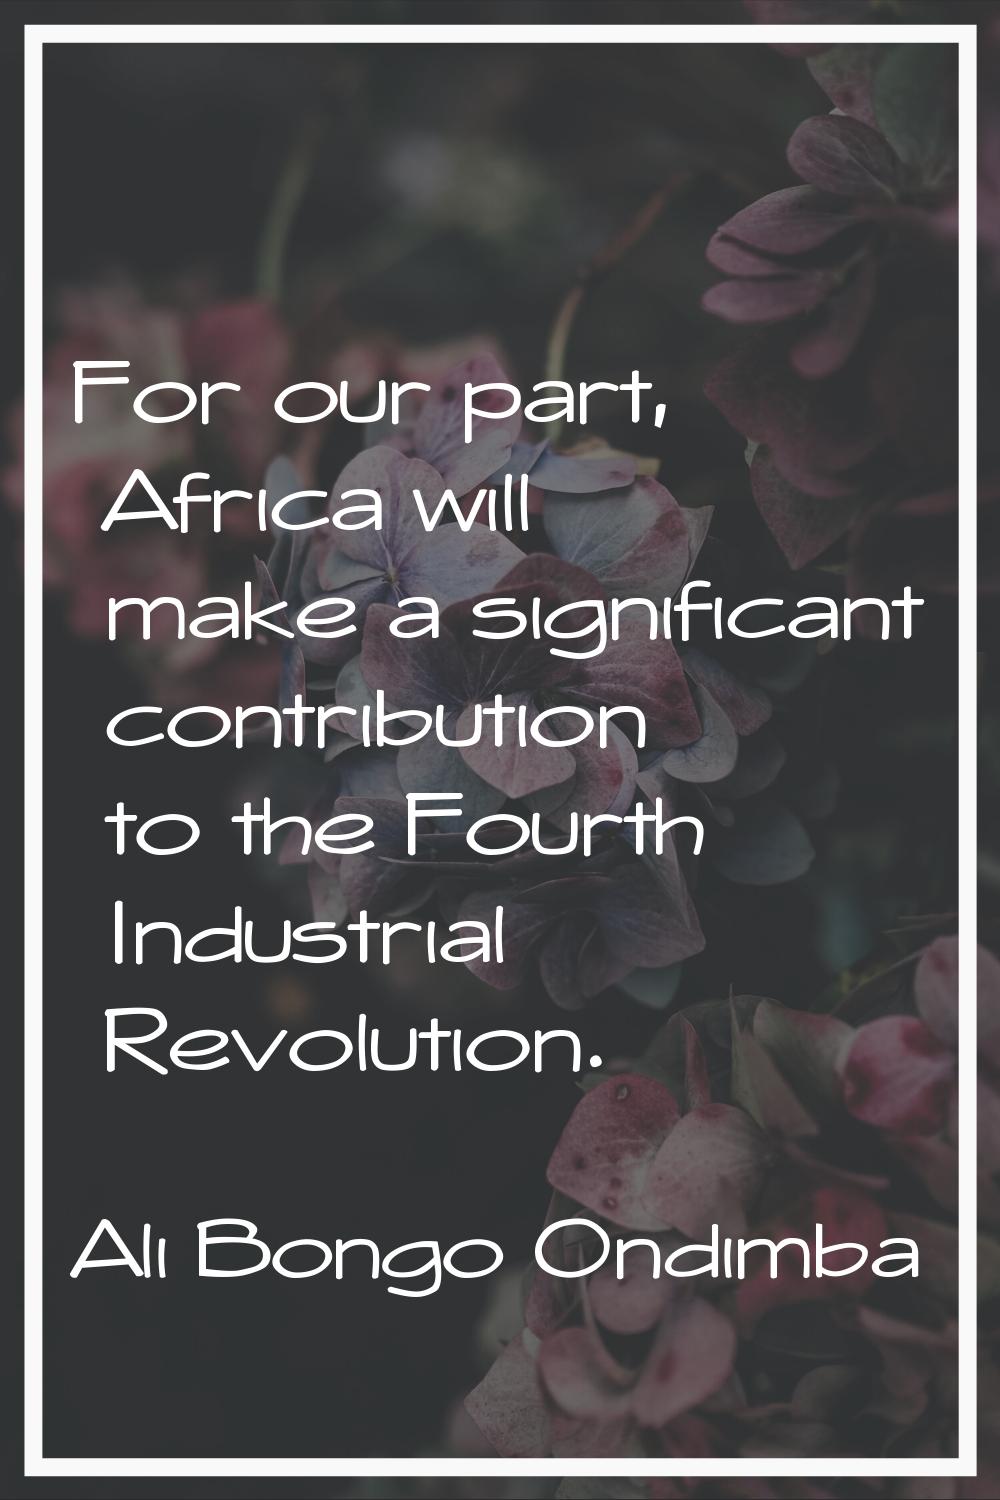 For our part, Africa will make a significant contribution to the Fourth Industrial Revolution.